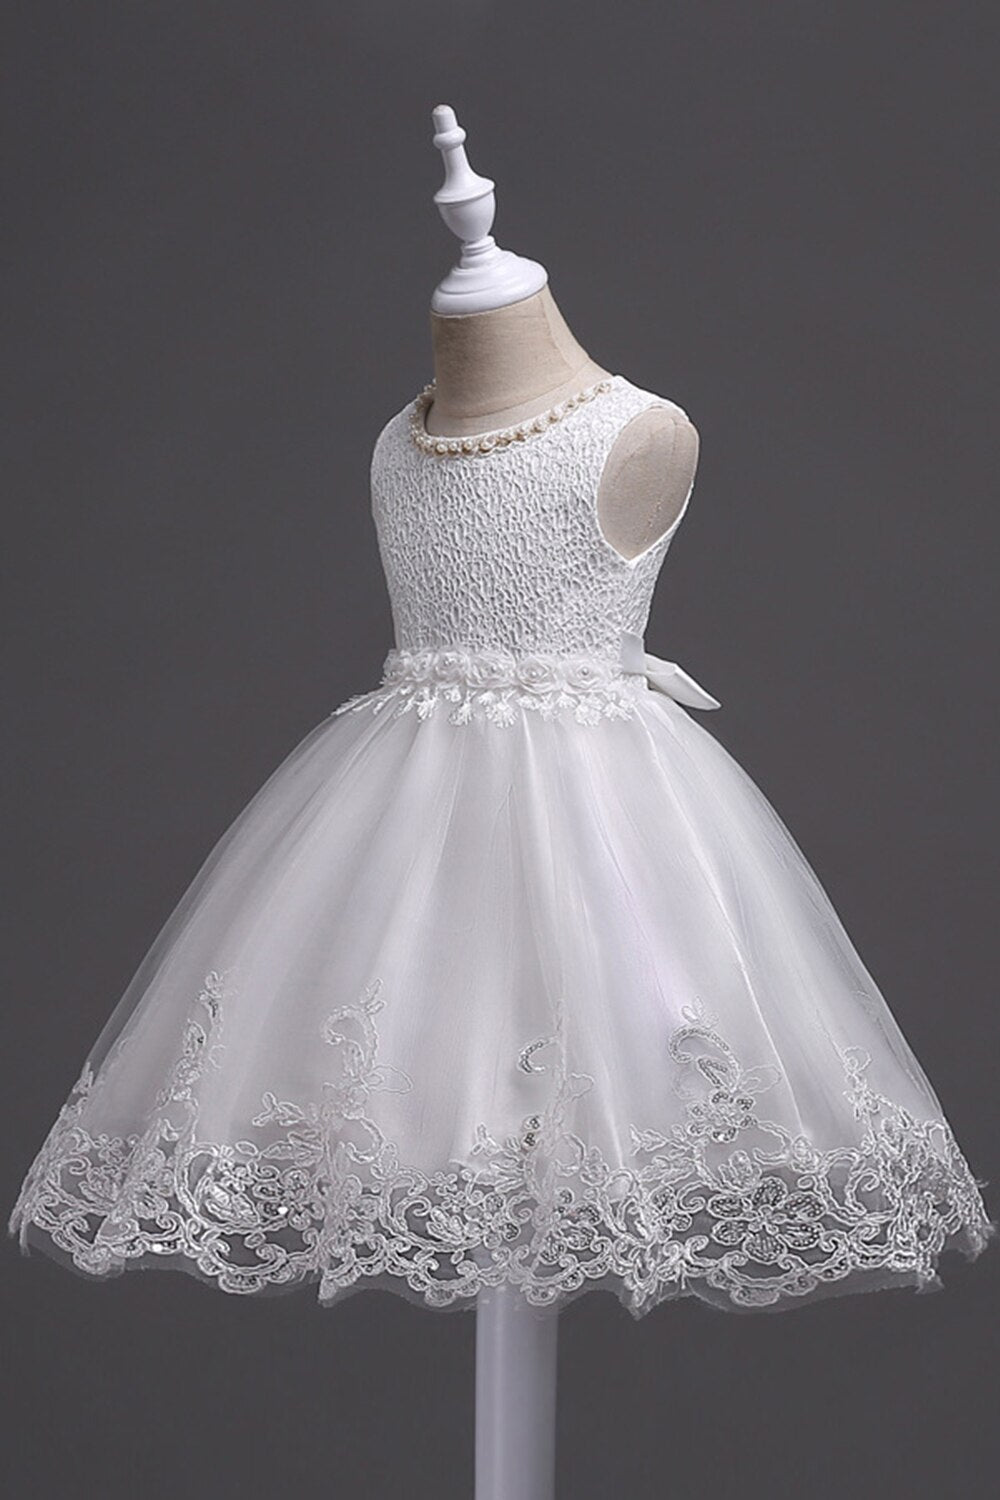 Lovely Lace Appliques Beaded Pearls Flower Girl Dresses Kids Evening Gowns Wedding First Communion Clothing vestido 1-10Years